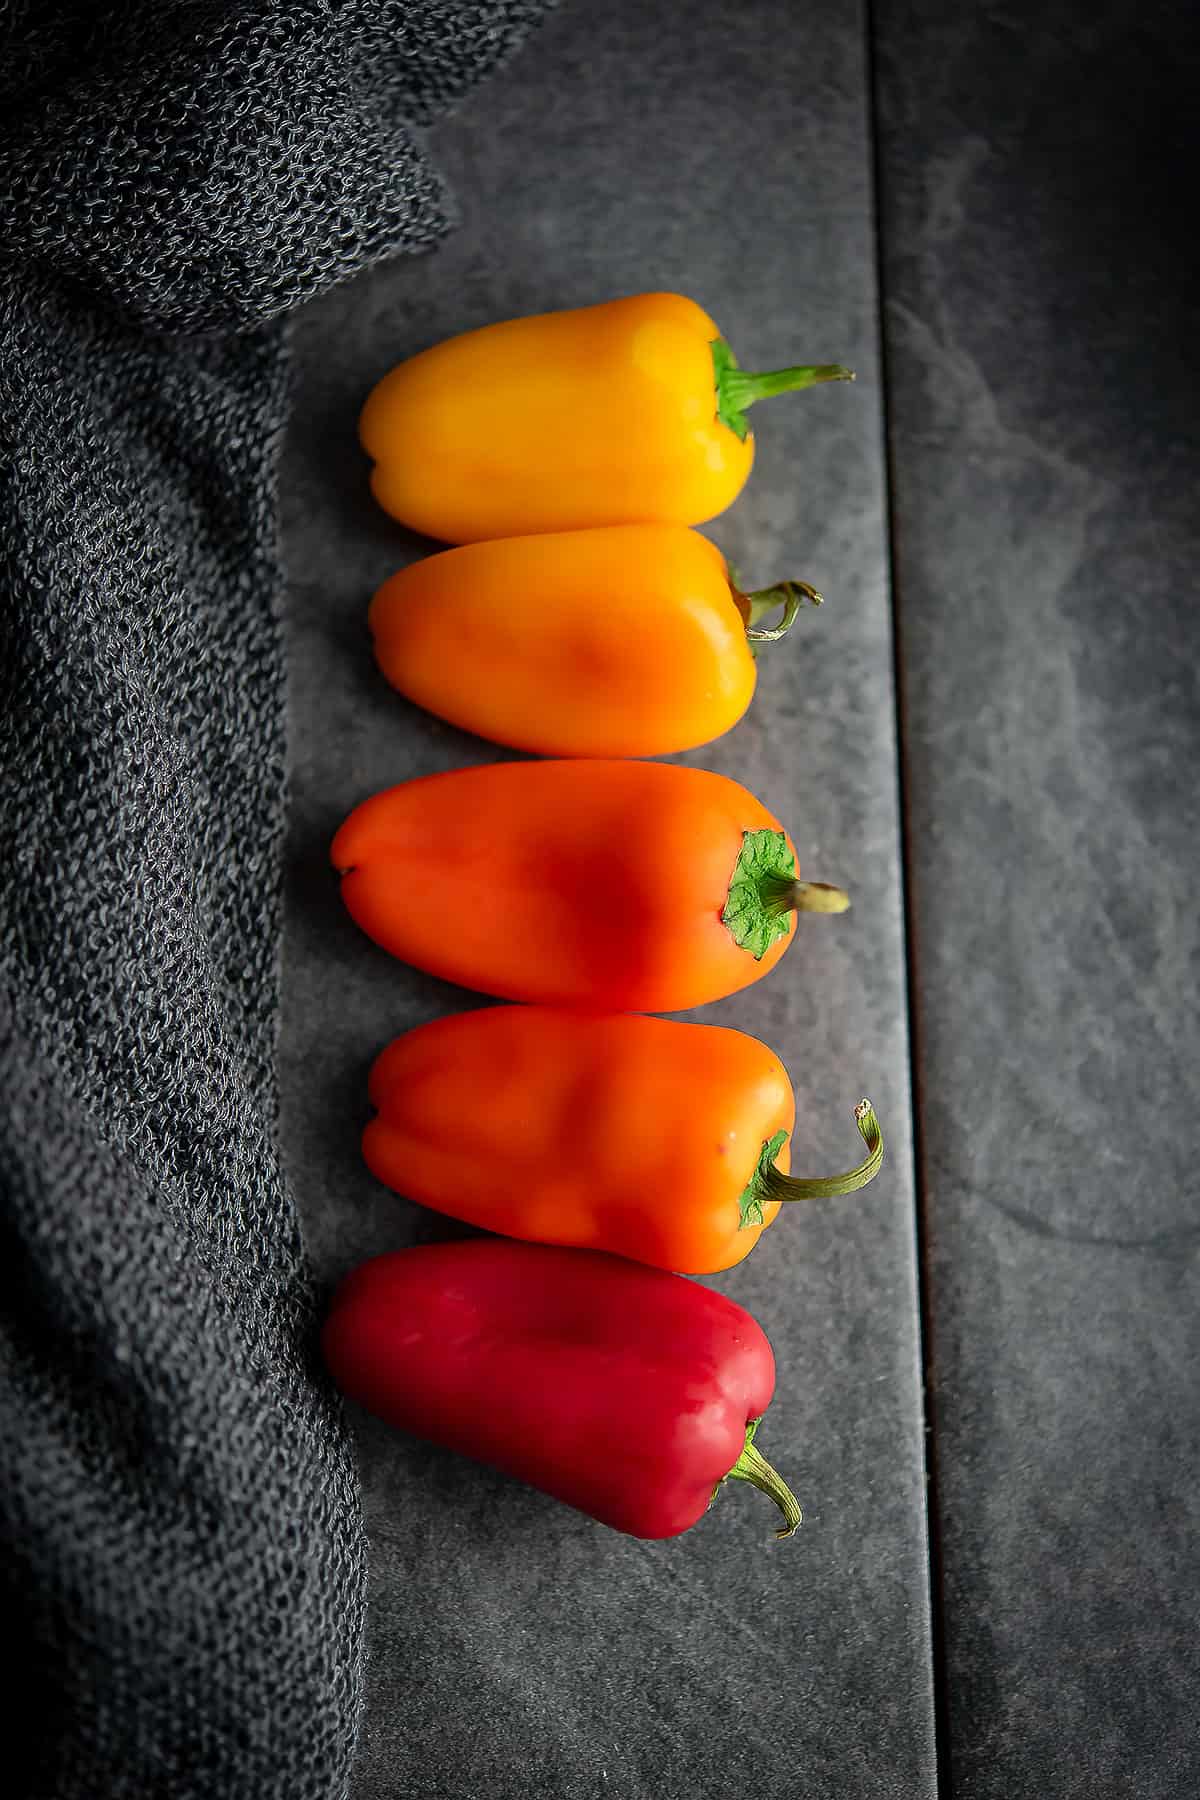 lunchbox peppers arranged in a table